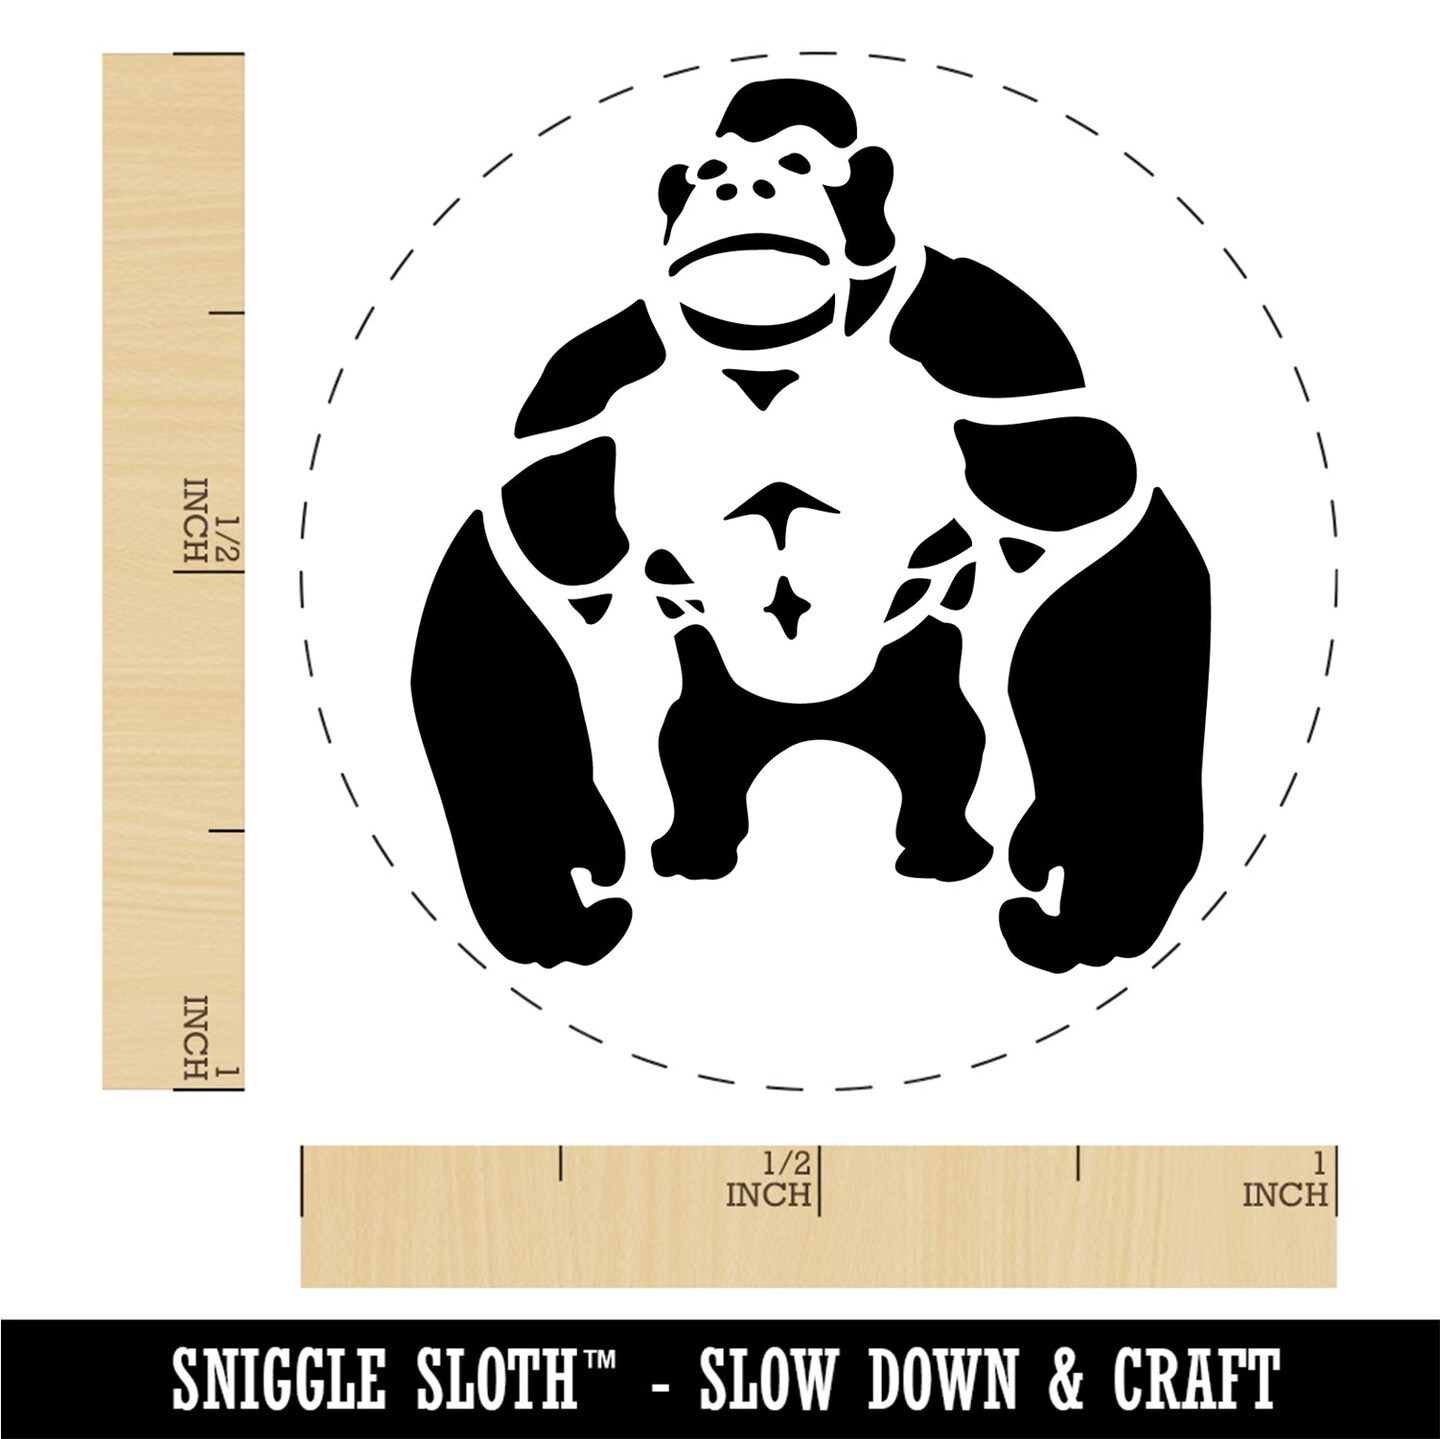 Brawny Gorilla Ape Self-Inking Rubber Stamp Ink Stamper for Stamping Crafting Planners